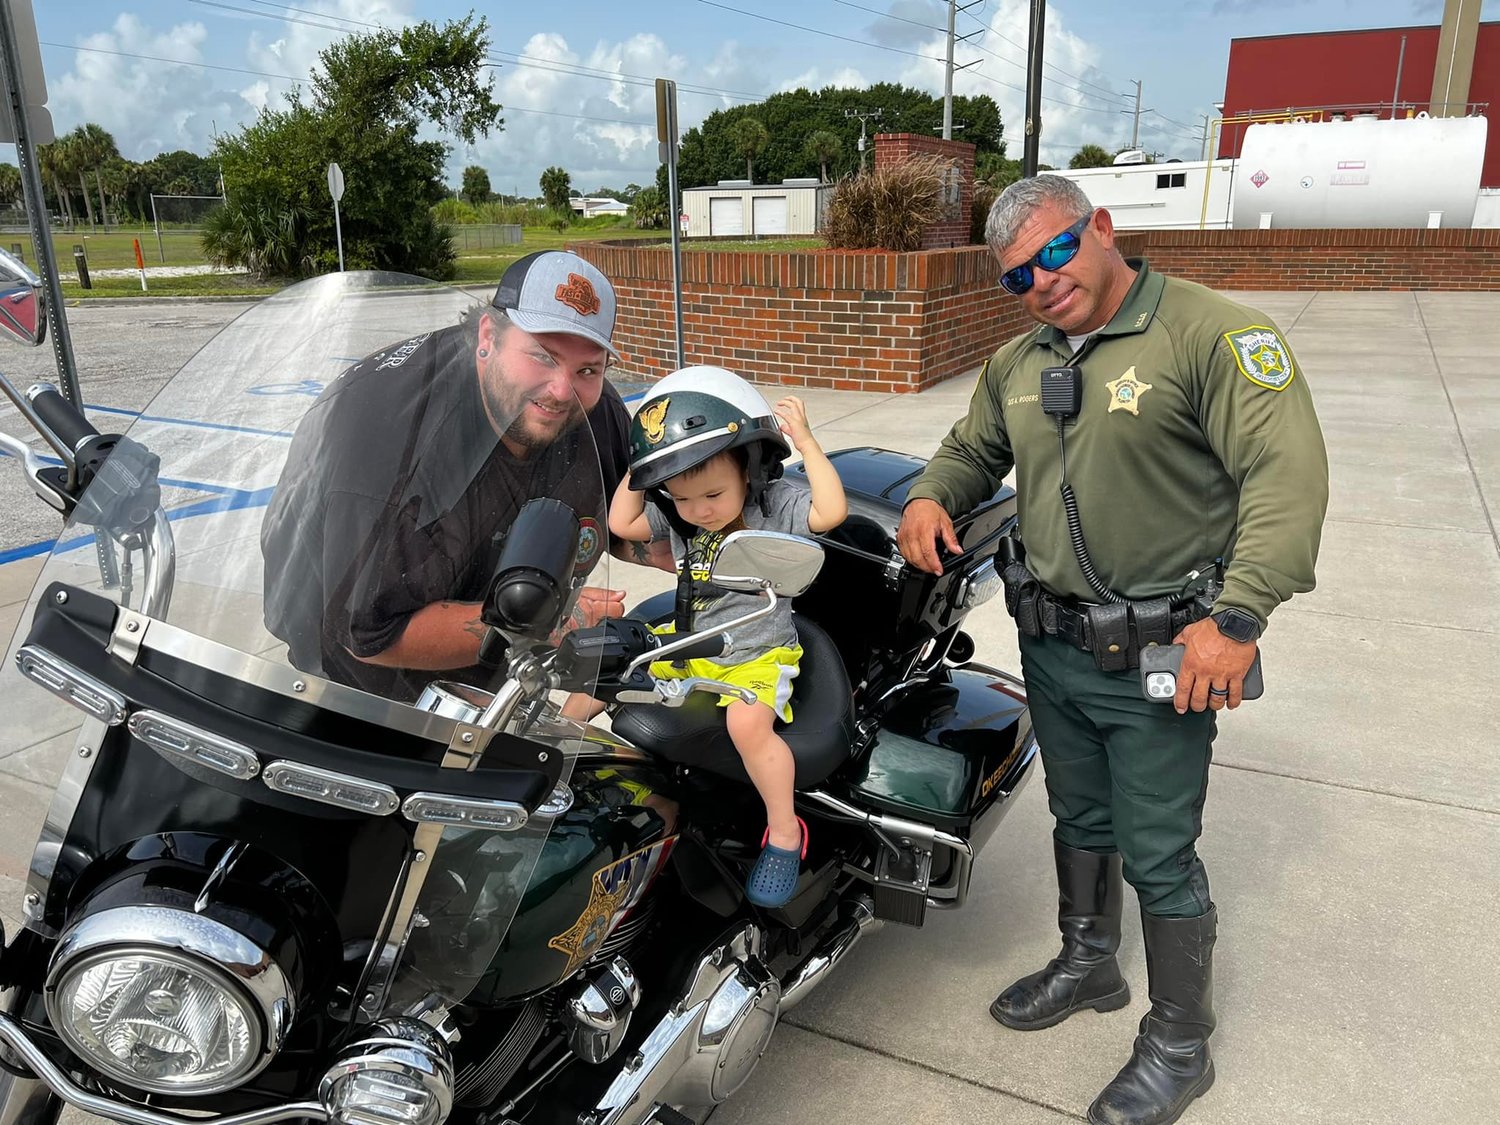 Senior Deputy Adrian Rogers (right) took a little time out of his day to make a young man feel special.